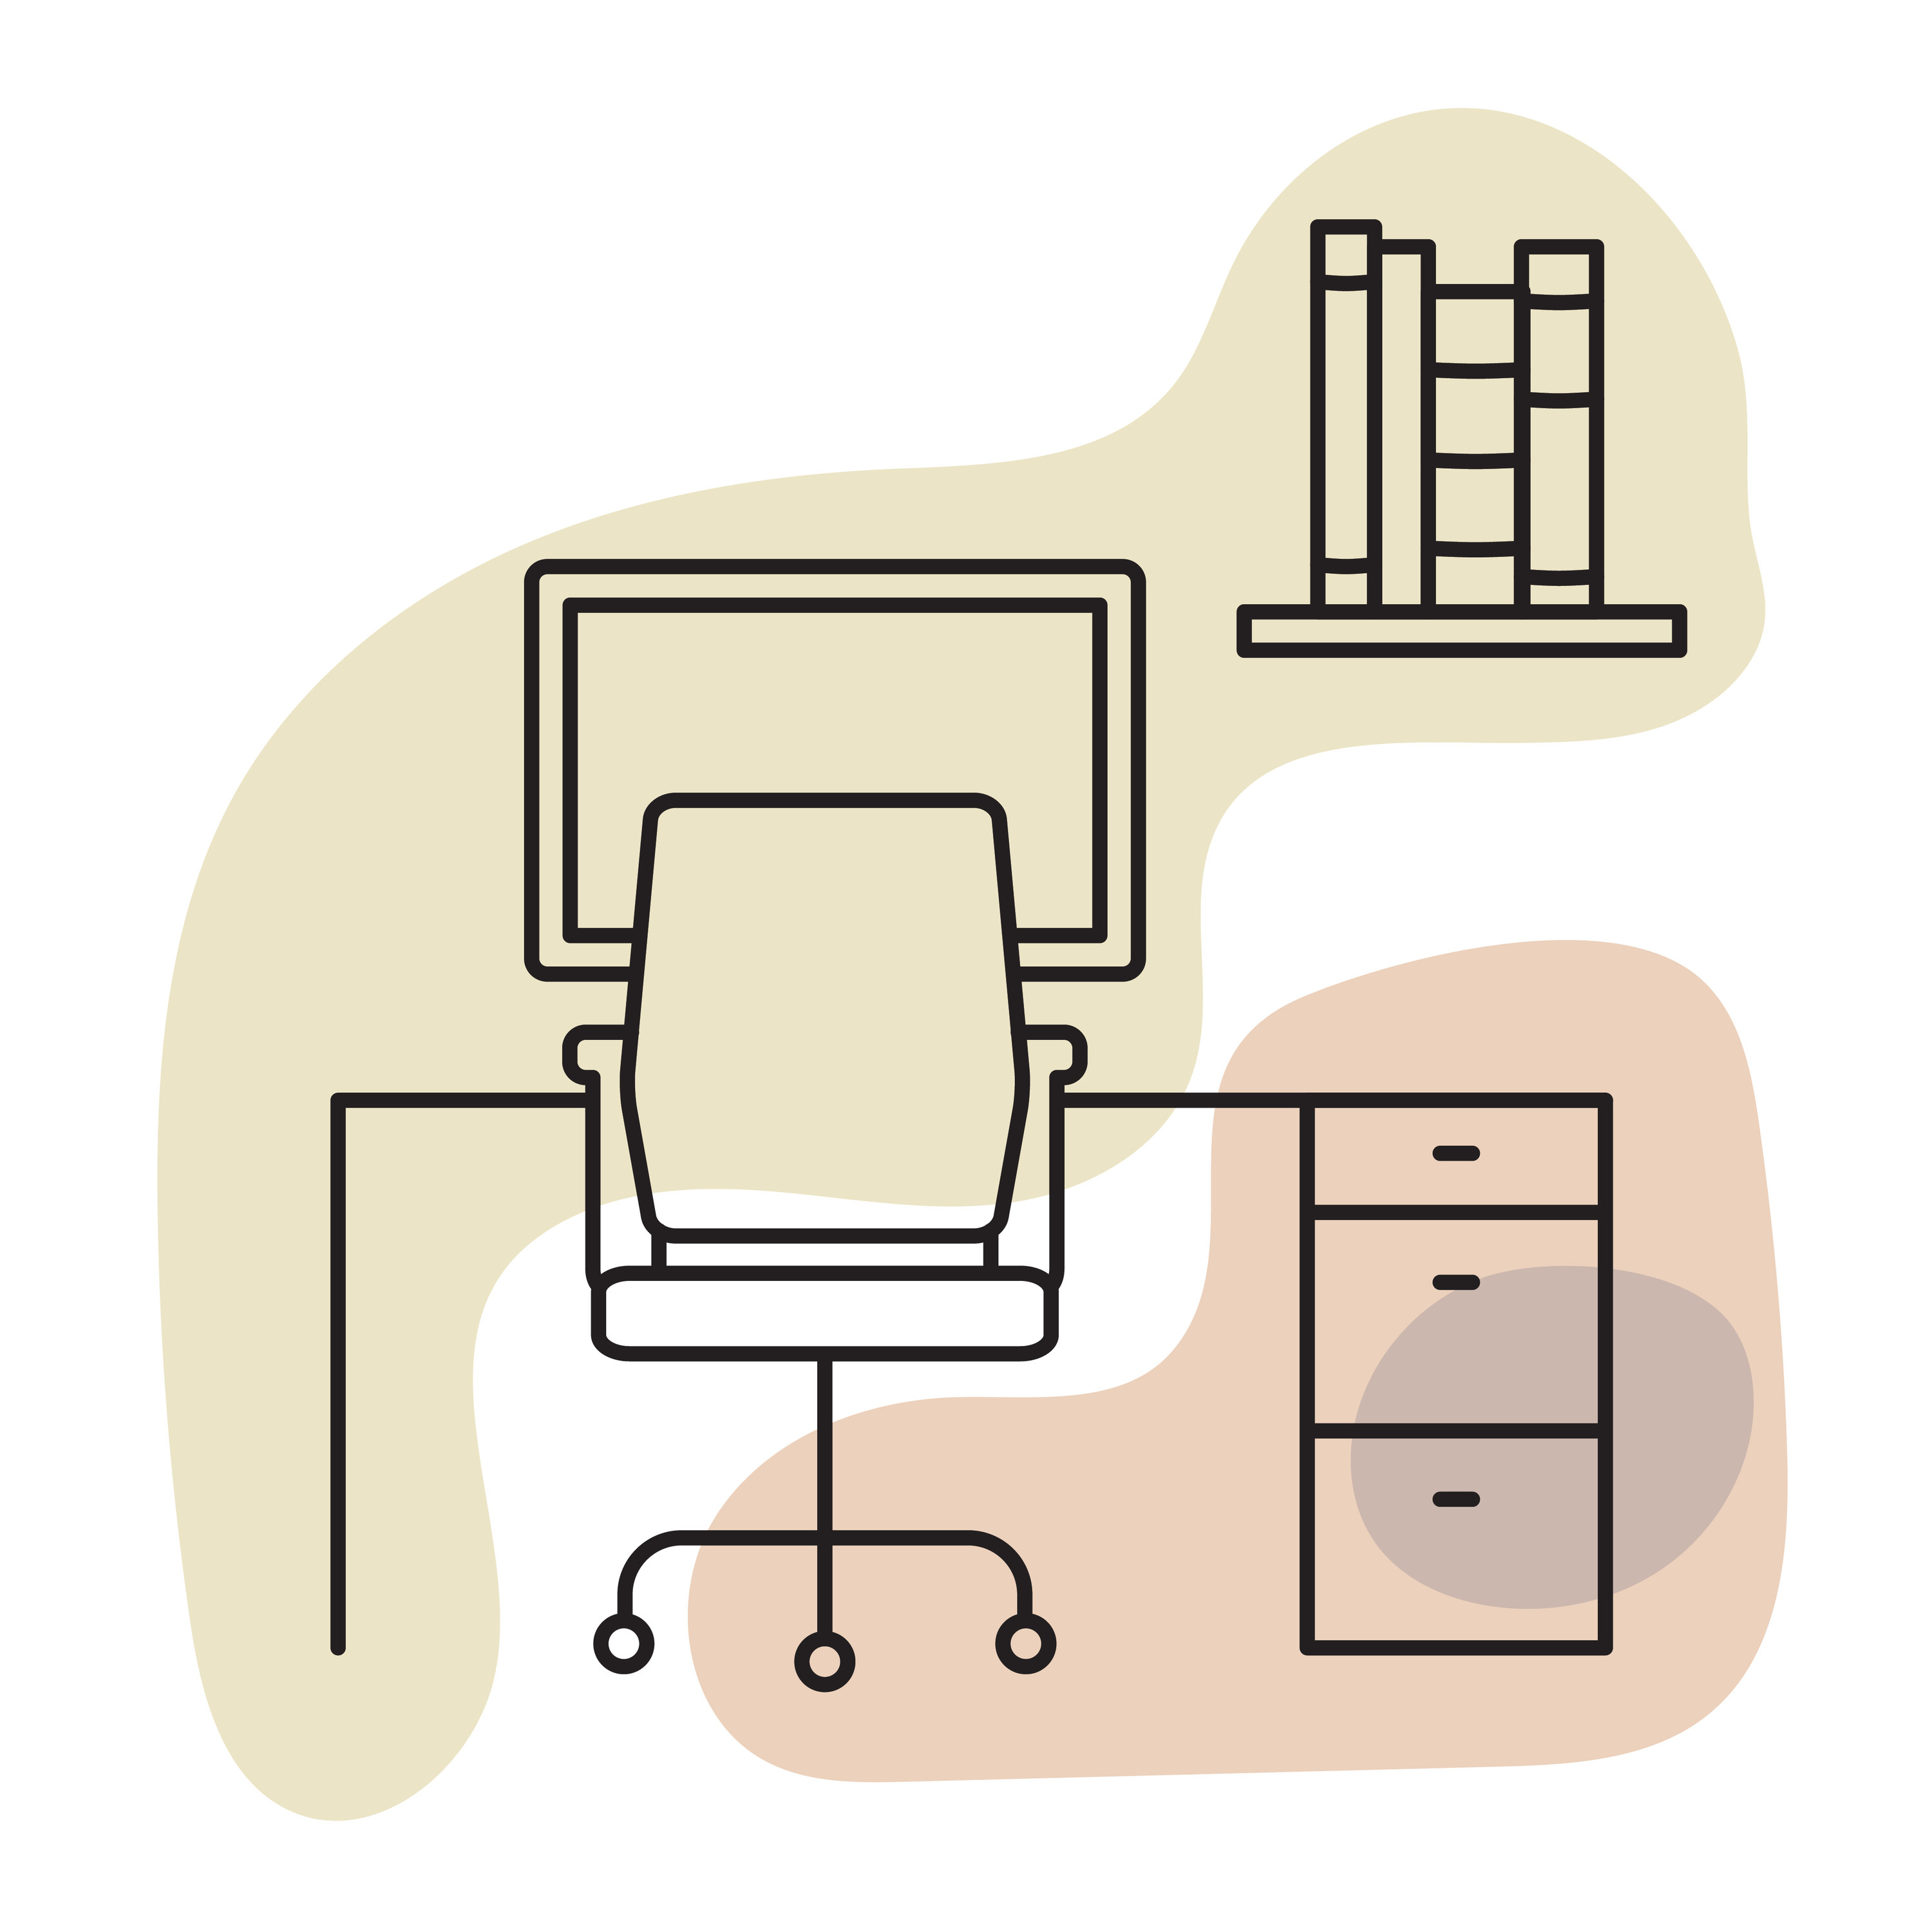 A drawing of an office desk and computer